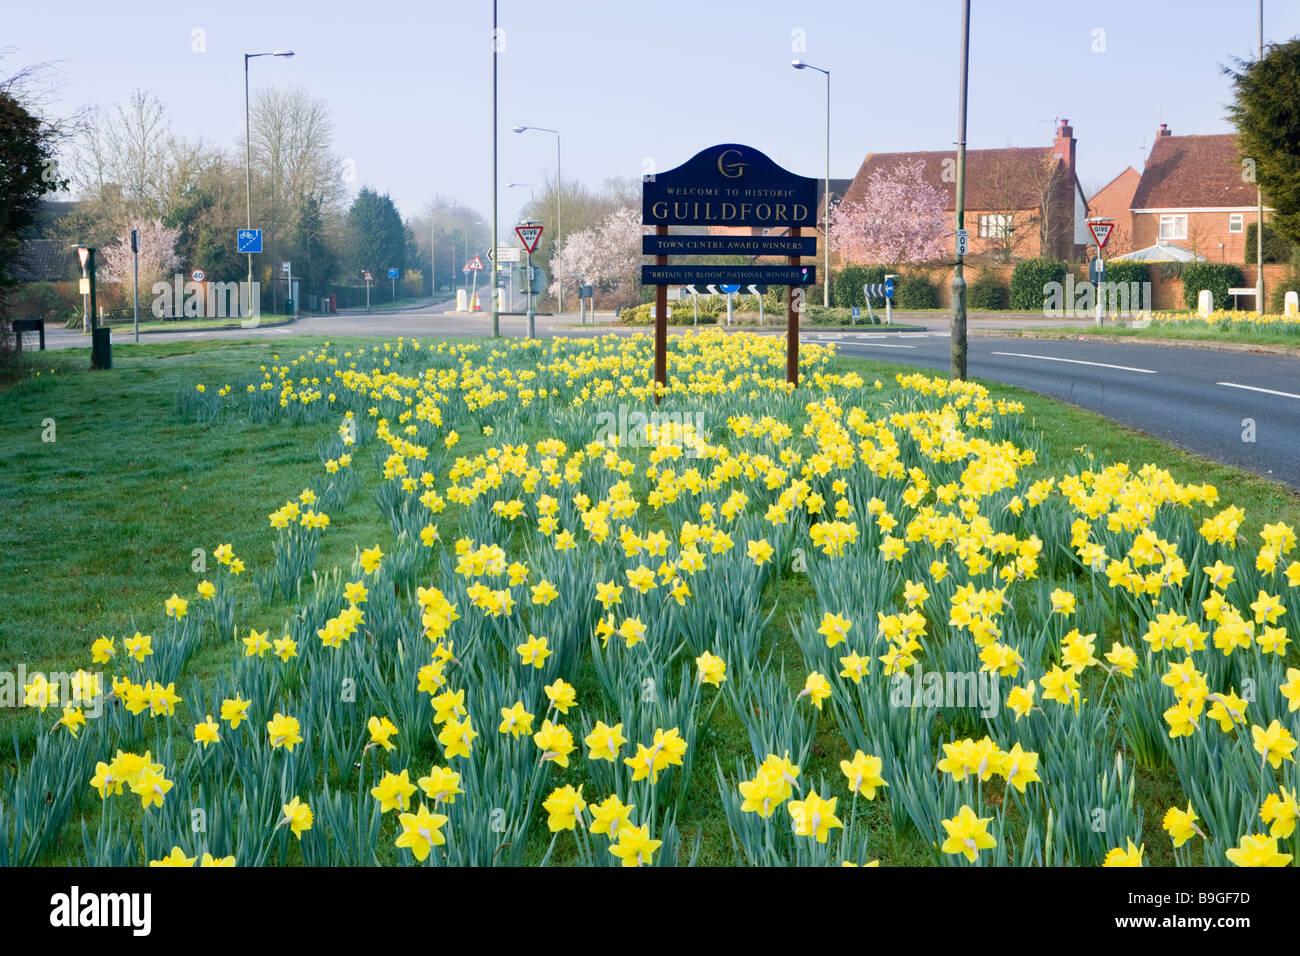 Welcome to Guildford sign at roadside with daffodils, Surrey, UK Stock Photo